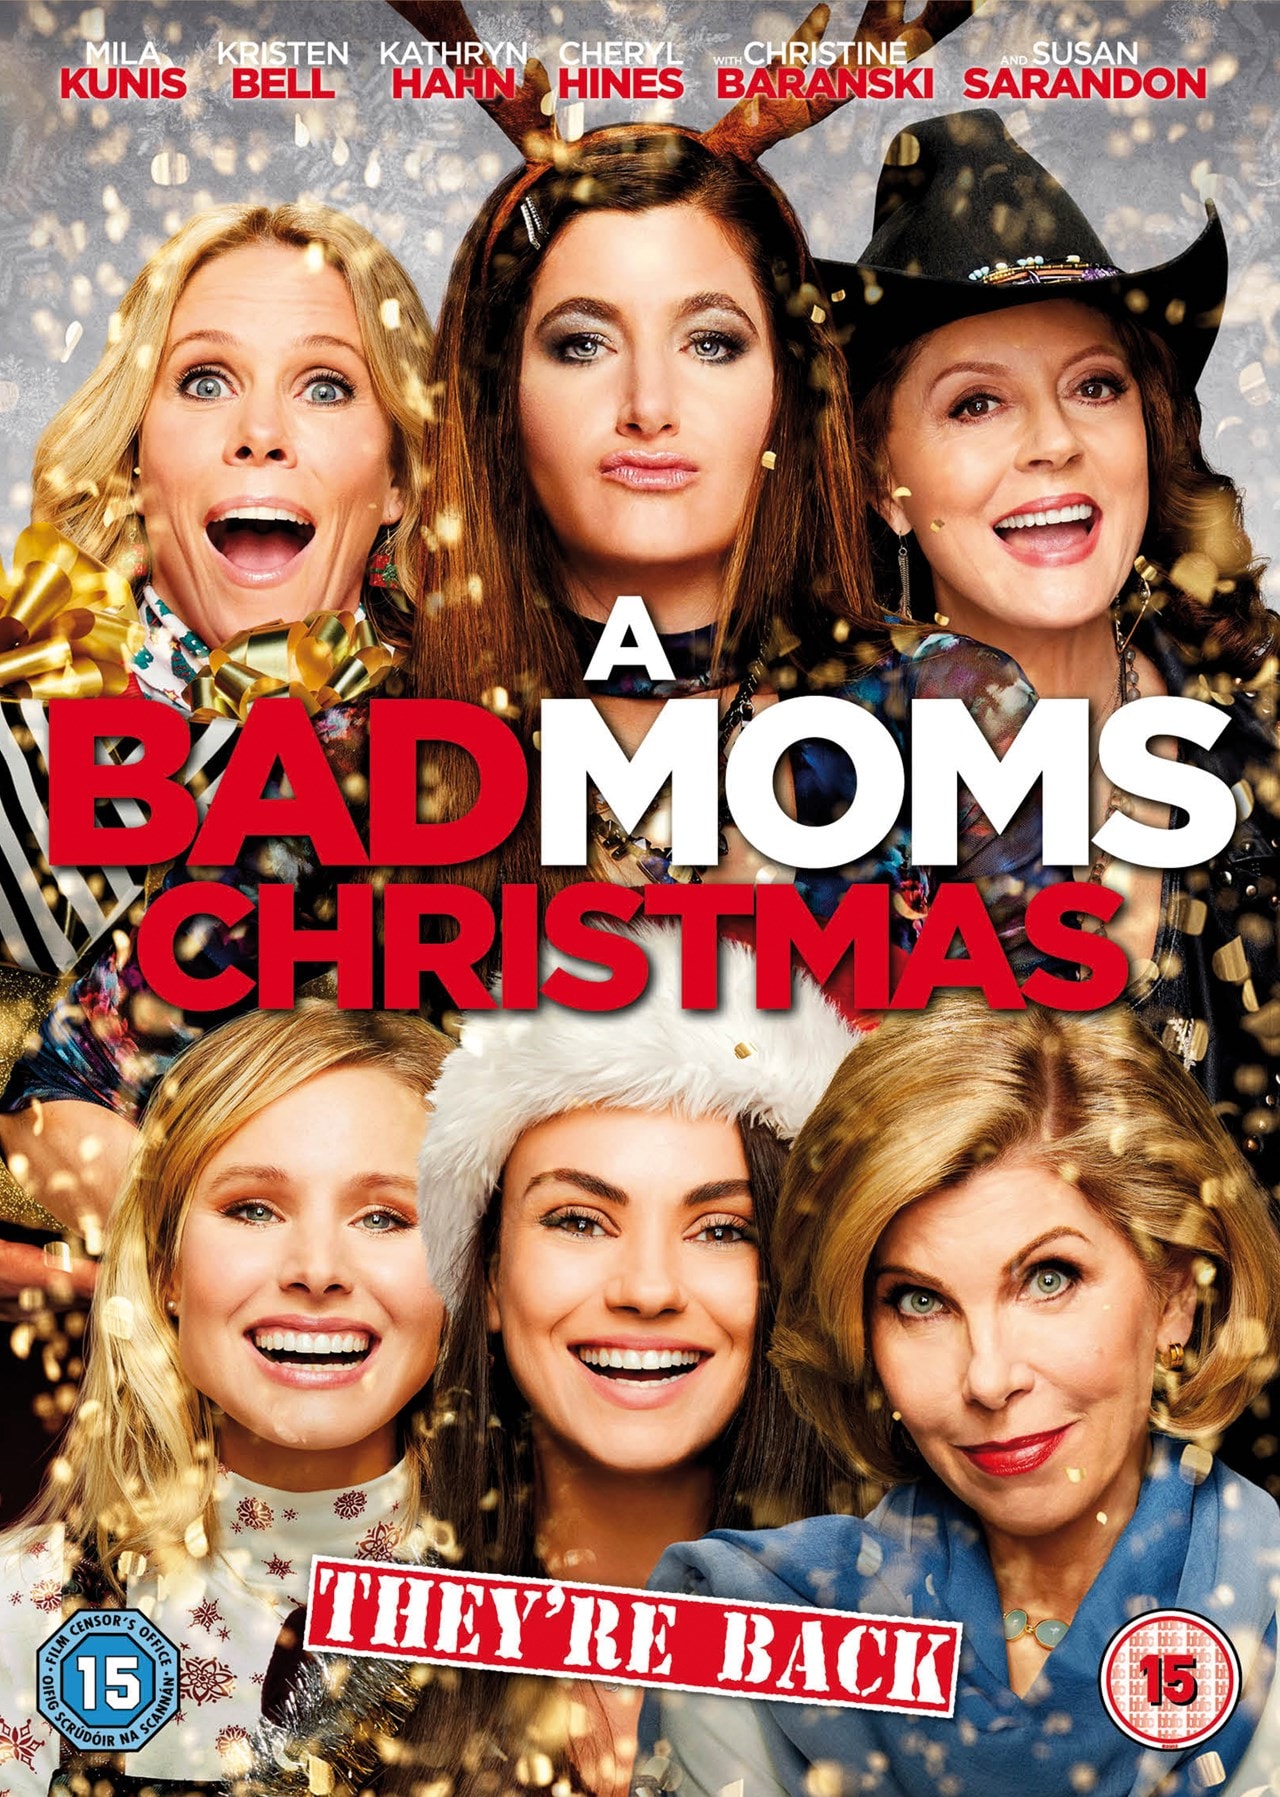 A Bad Moms Christmas DVD Free shipping over £20 HMV Store